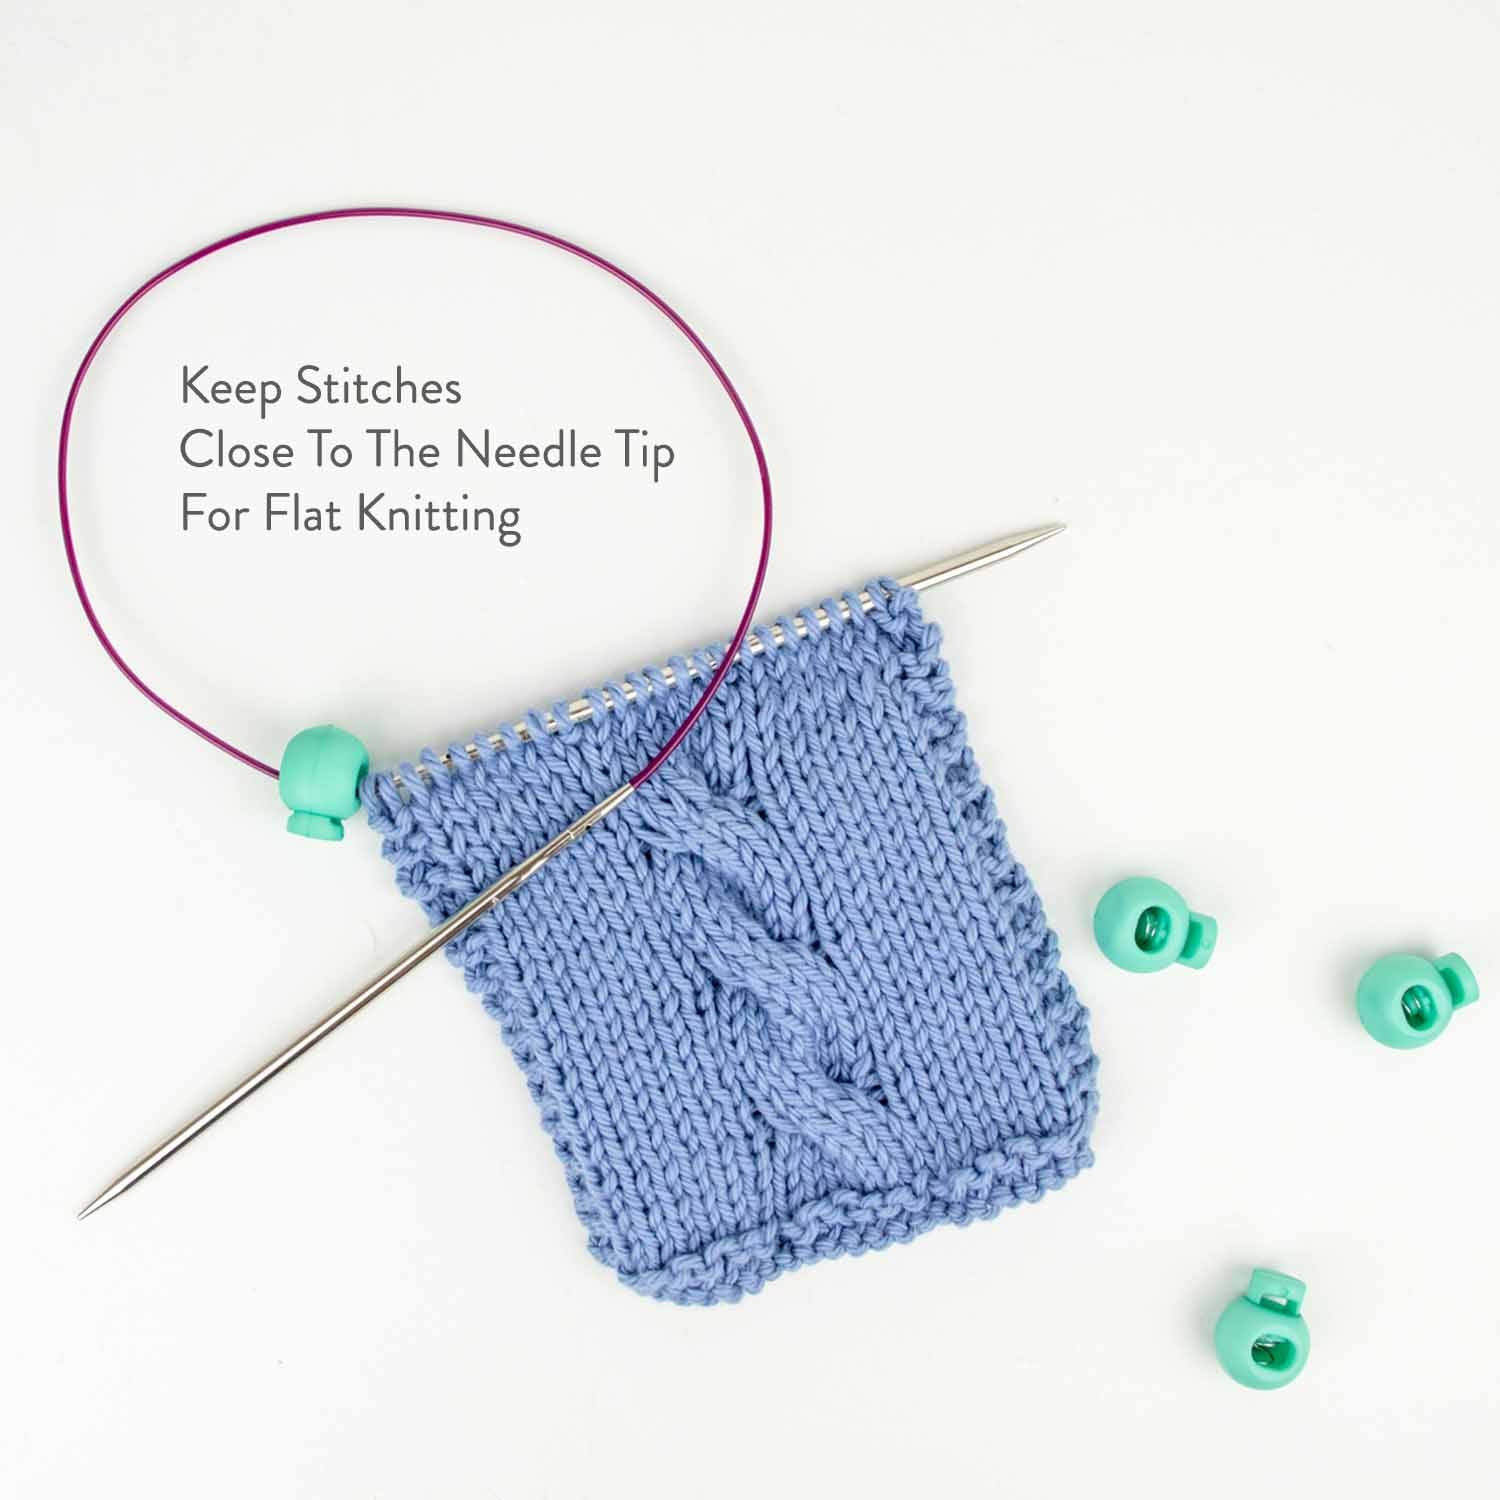 Tip Ties - Knitting Needle Point Protectors - Twice Sheared Sheep